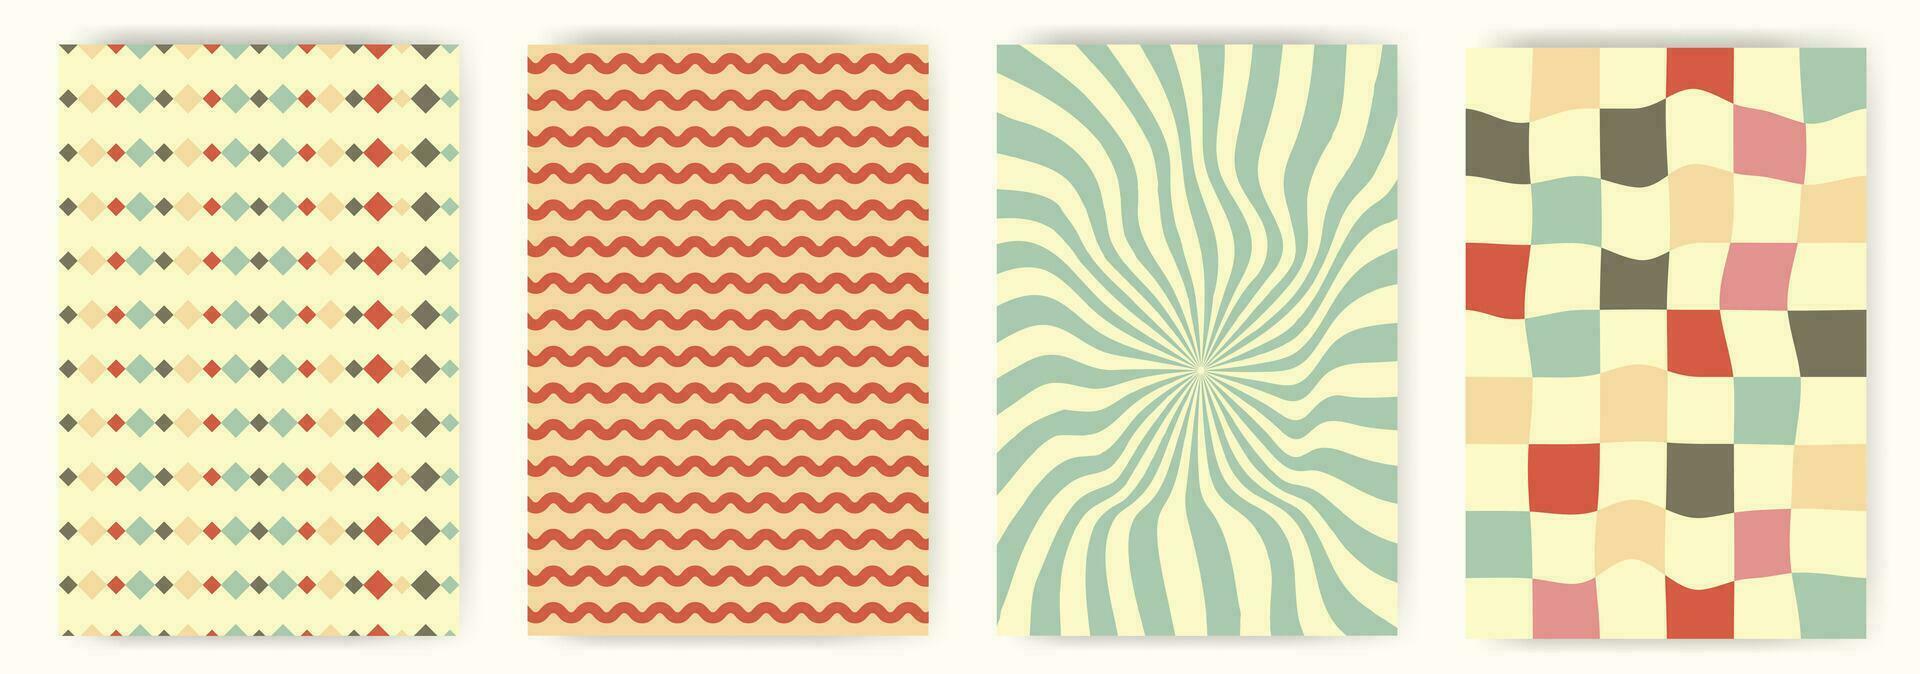 Retro groovy vintage 60s, 70s style background collection vector